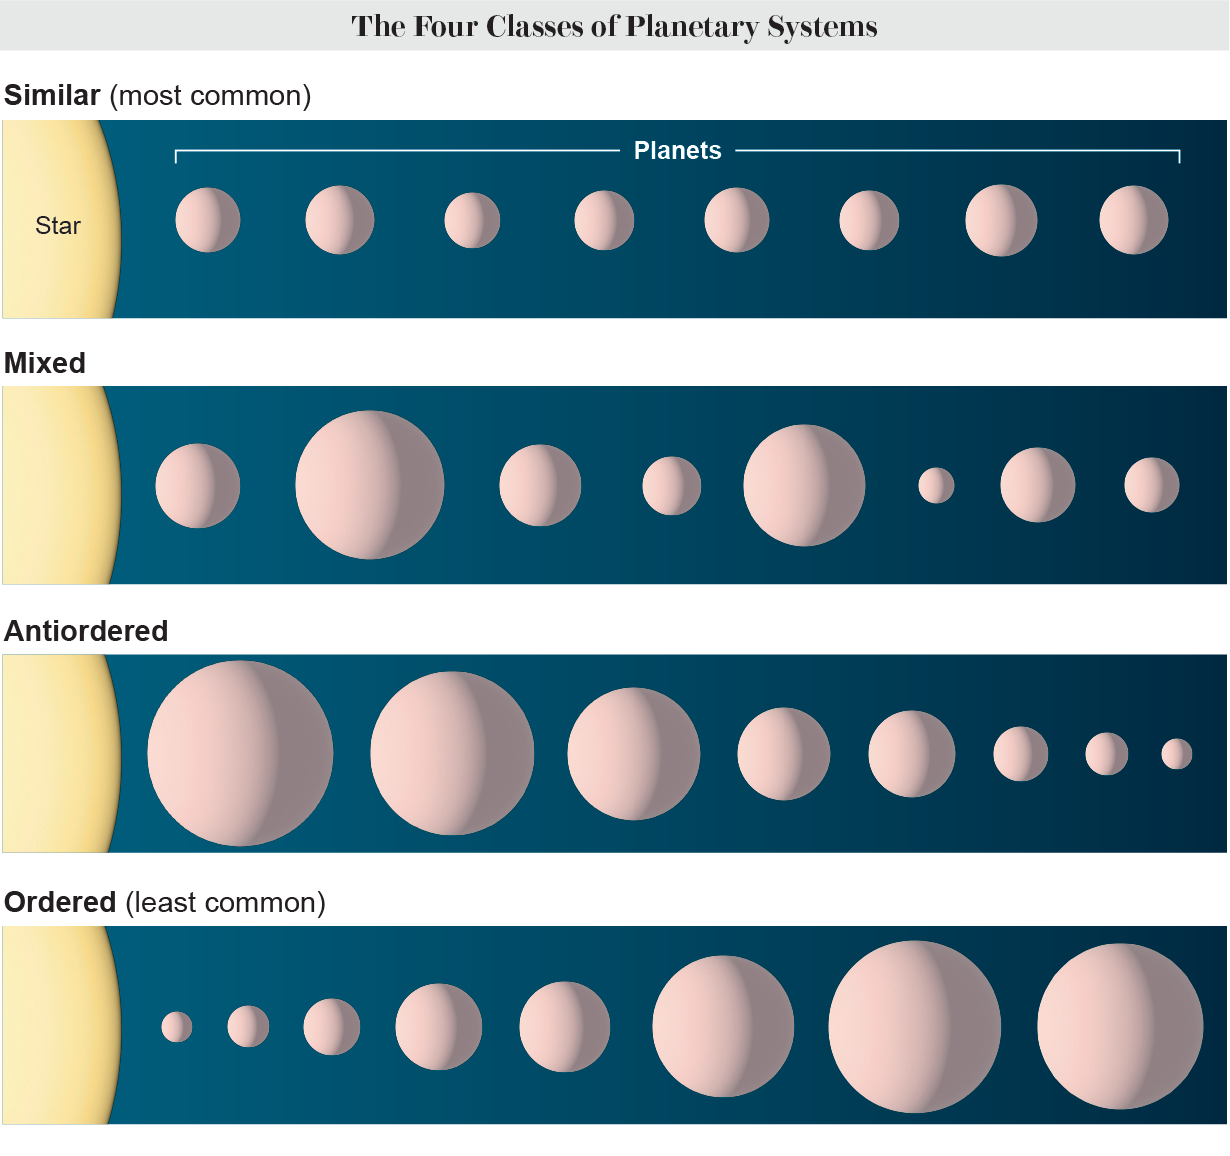 Diagram shows planet arrangements characteristic of the four classes of planetary systems: similar, mixed, antiordered and ordered.